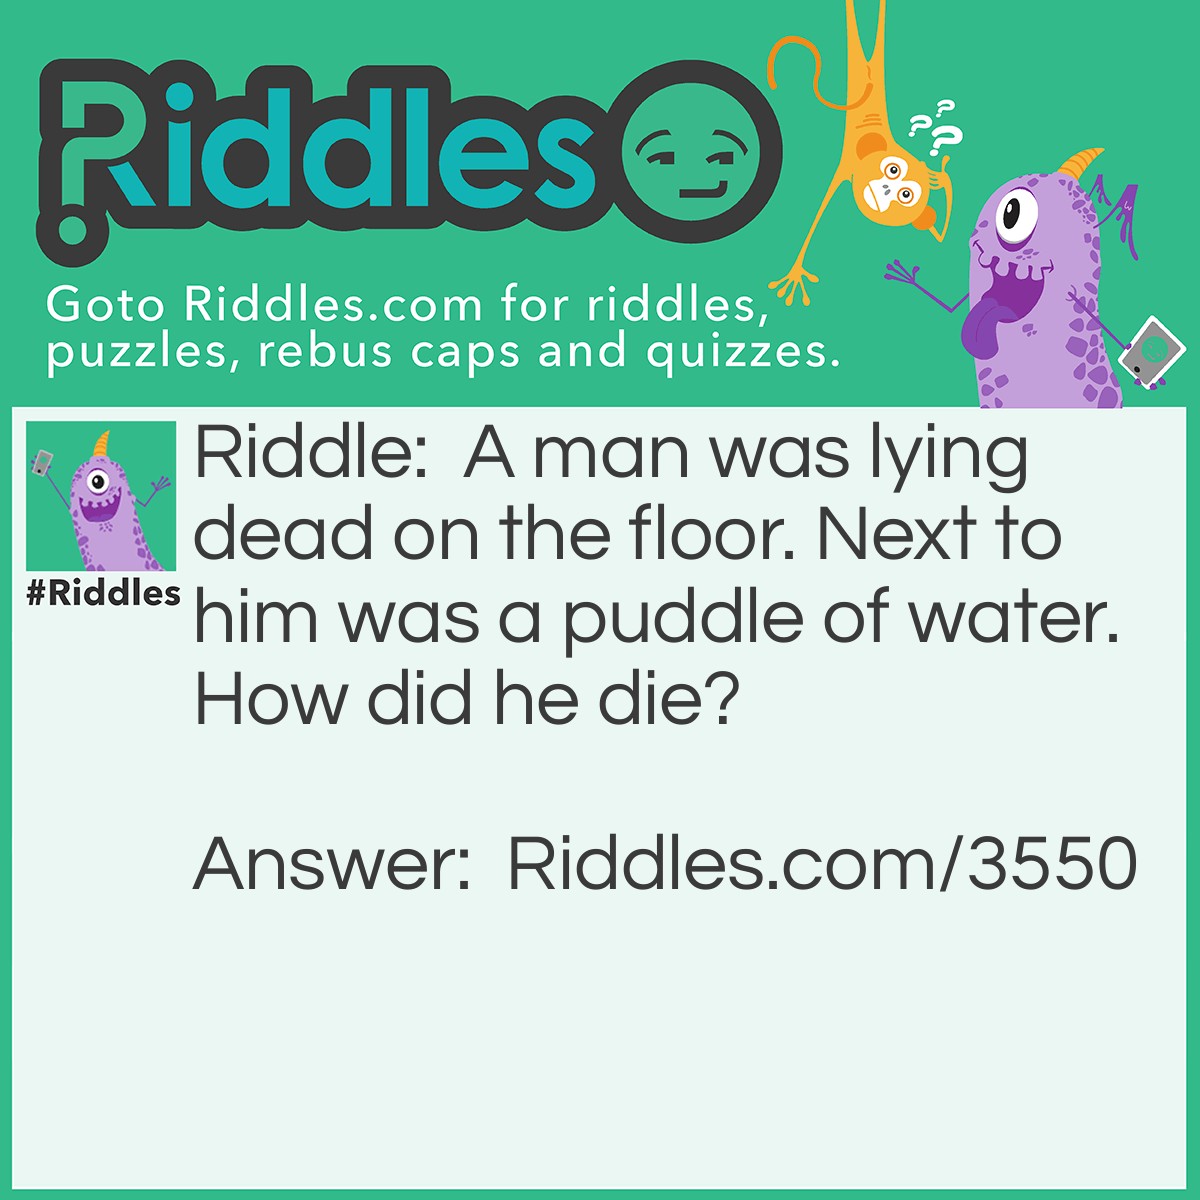 Riddle: A man was lying dead on the floor. Next to him was a puddle of water. How did he die? Answer: The man was stabbed with an icicle.